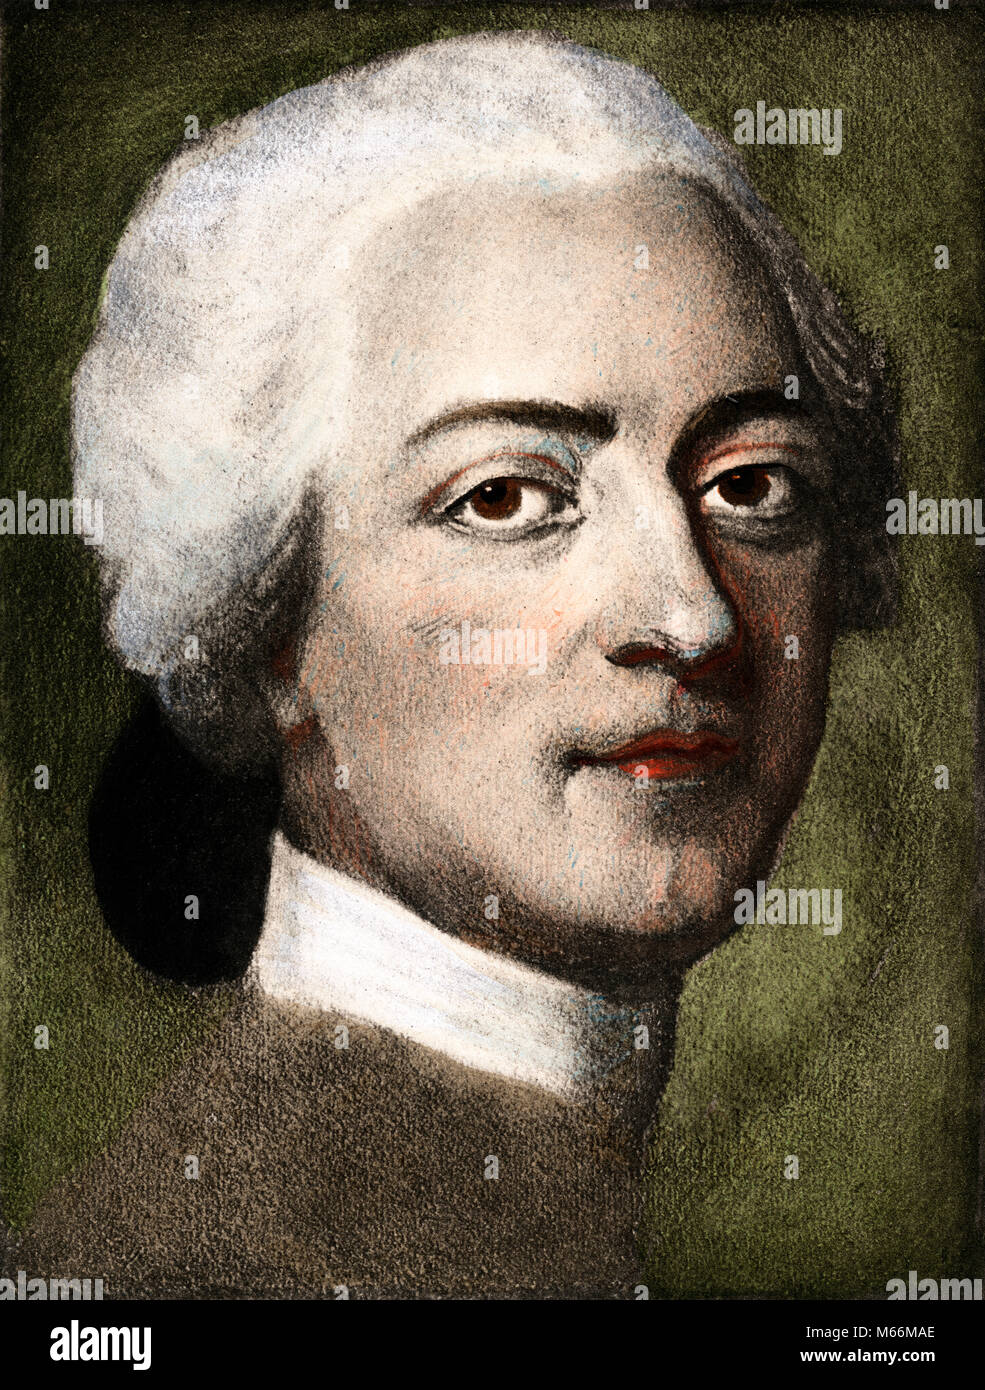 1700s 18TH CENTURY LOUIS XV KING OF FRANCE PORTRAIT LOOKING AT CAMERA COLOR HALFTONE - kh13249 CPC001 HARS LOUIS XV OLD FASHIONED PERIWIG PERSONS POWDERED XV Stock Photo